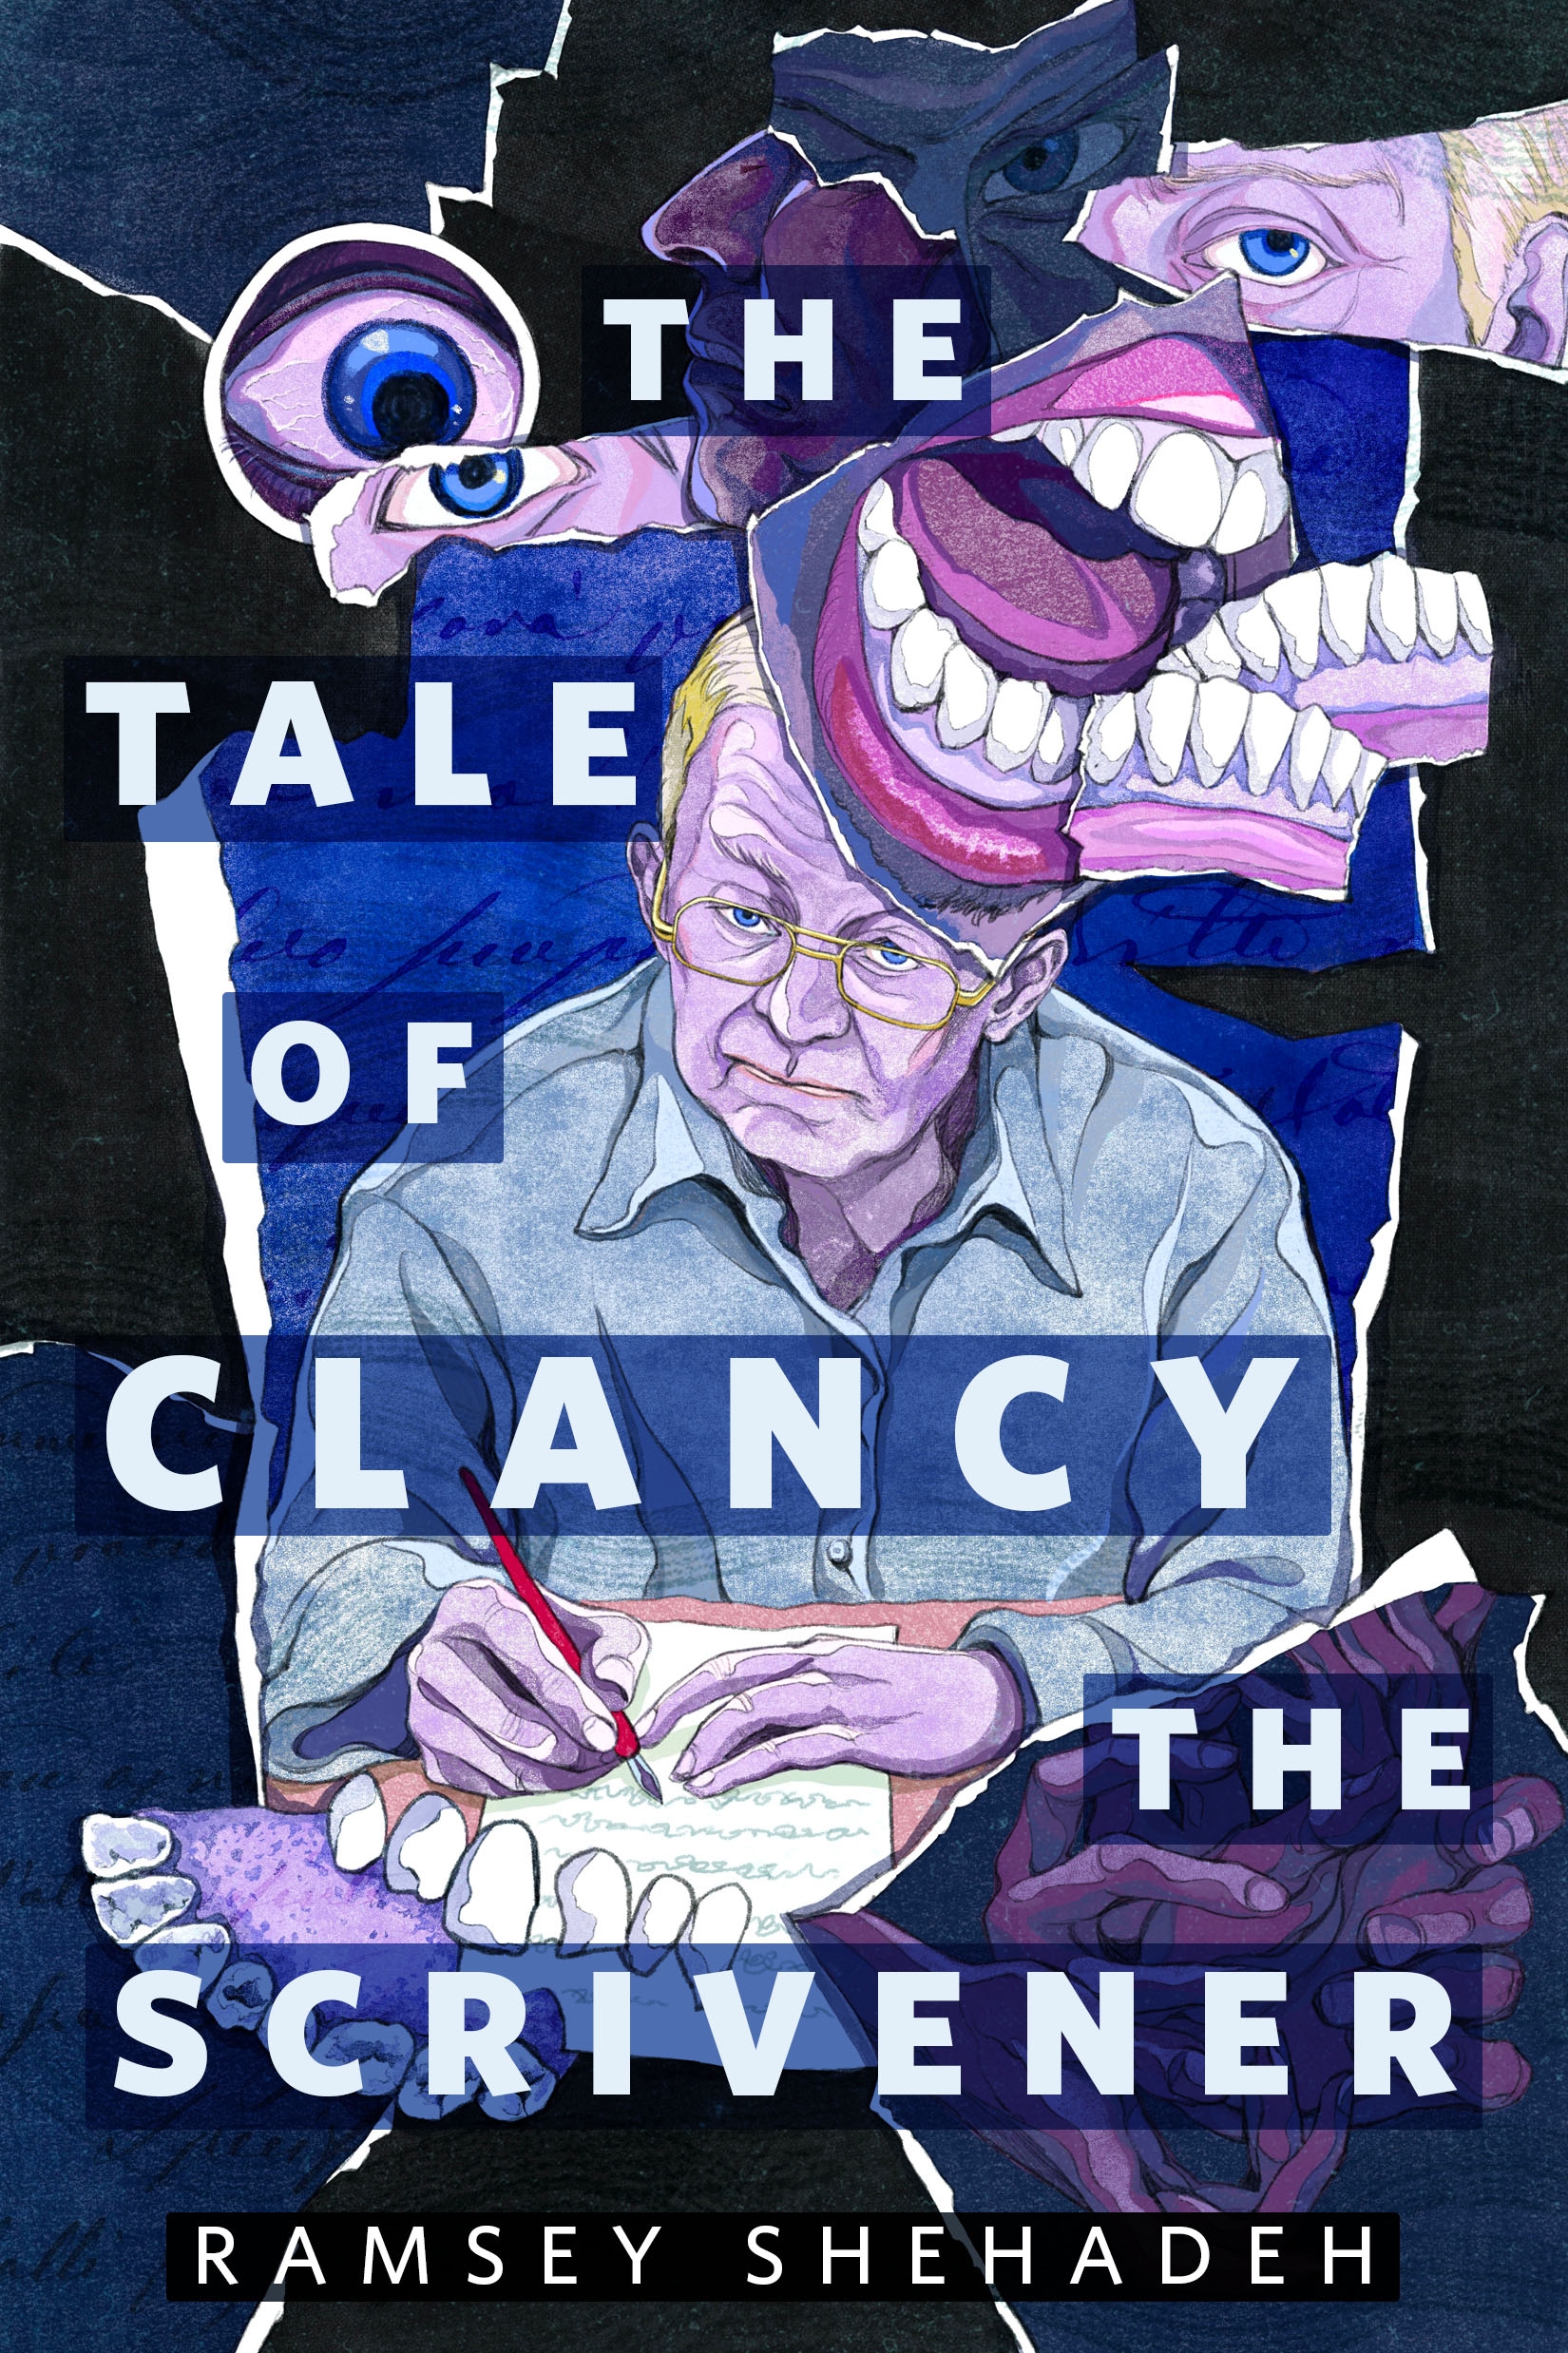 The Tale of Clancy the Scrivener : A Tor.com Original by Ramsey Shehadeh